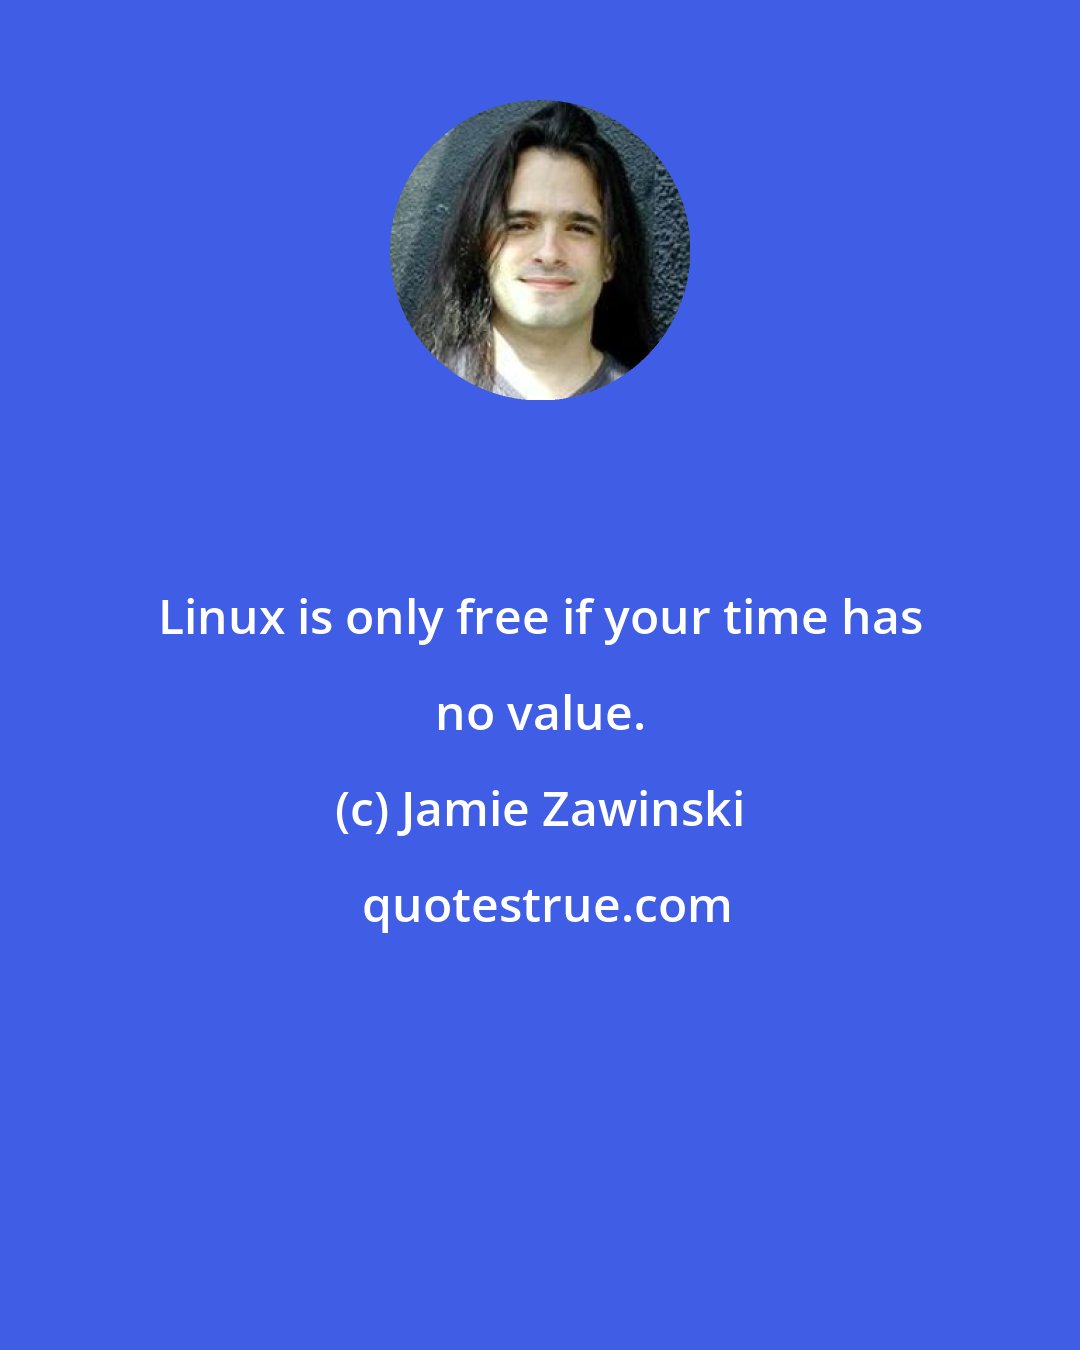 Jamie Zawinski: Linux is only free if your time has no value.